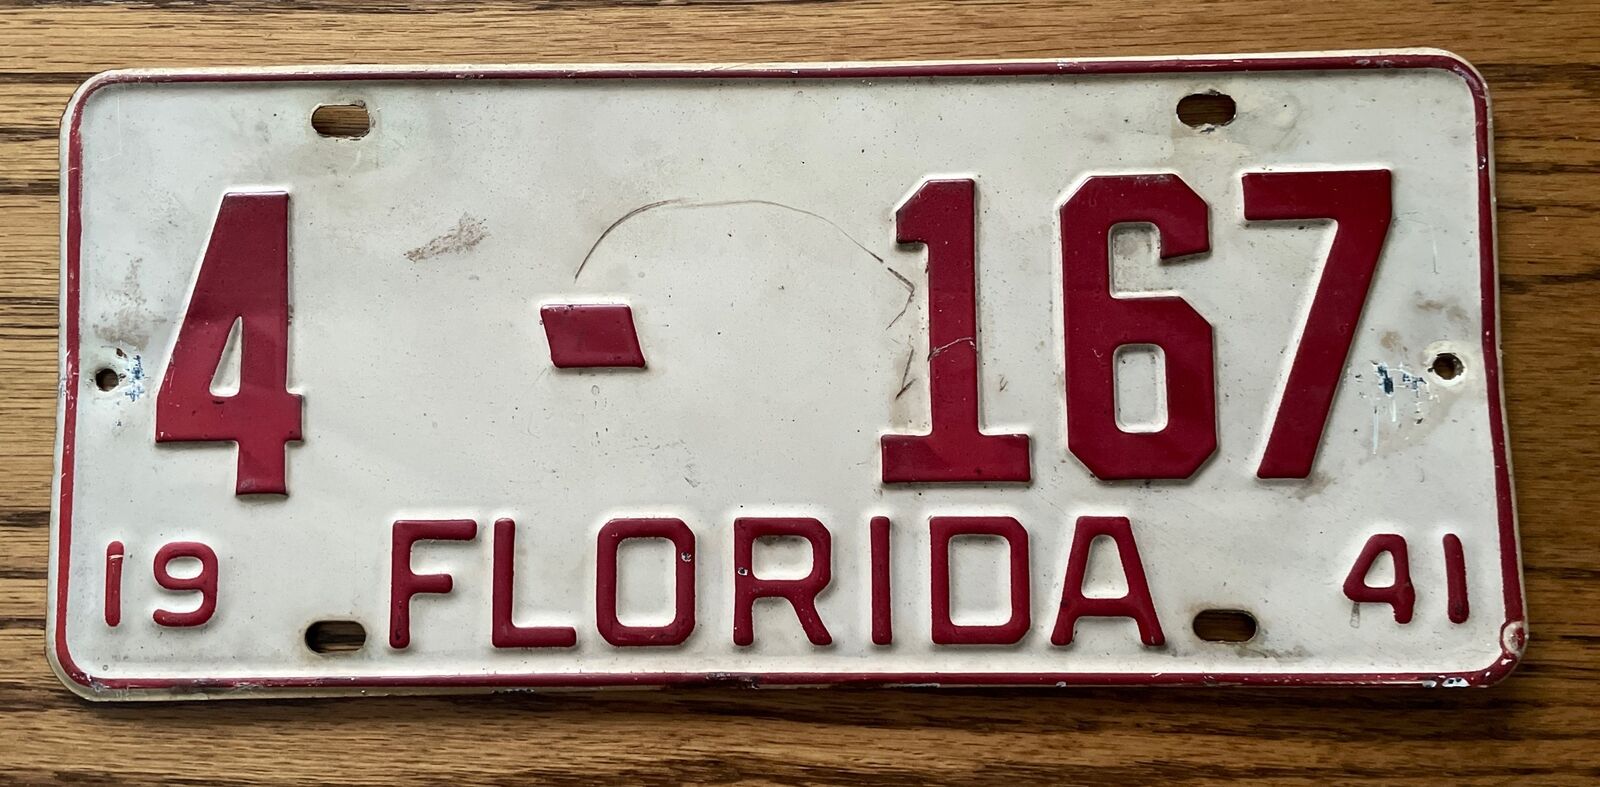 1941 Florida PINELLAS COUNTY License Plate #4-167